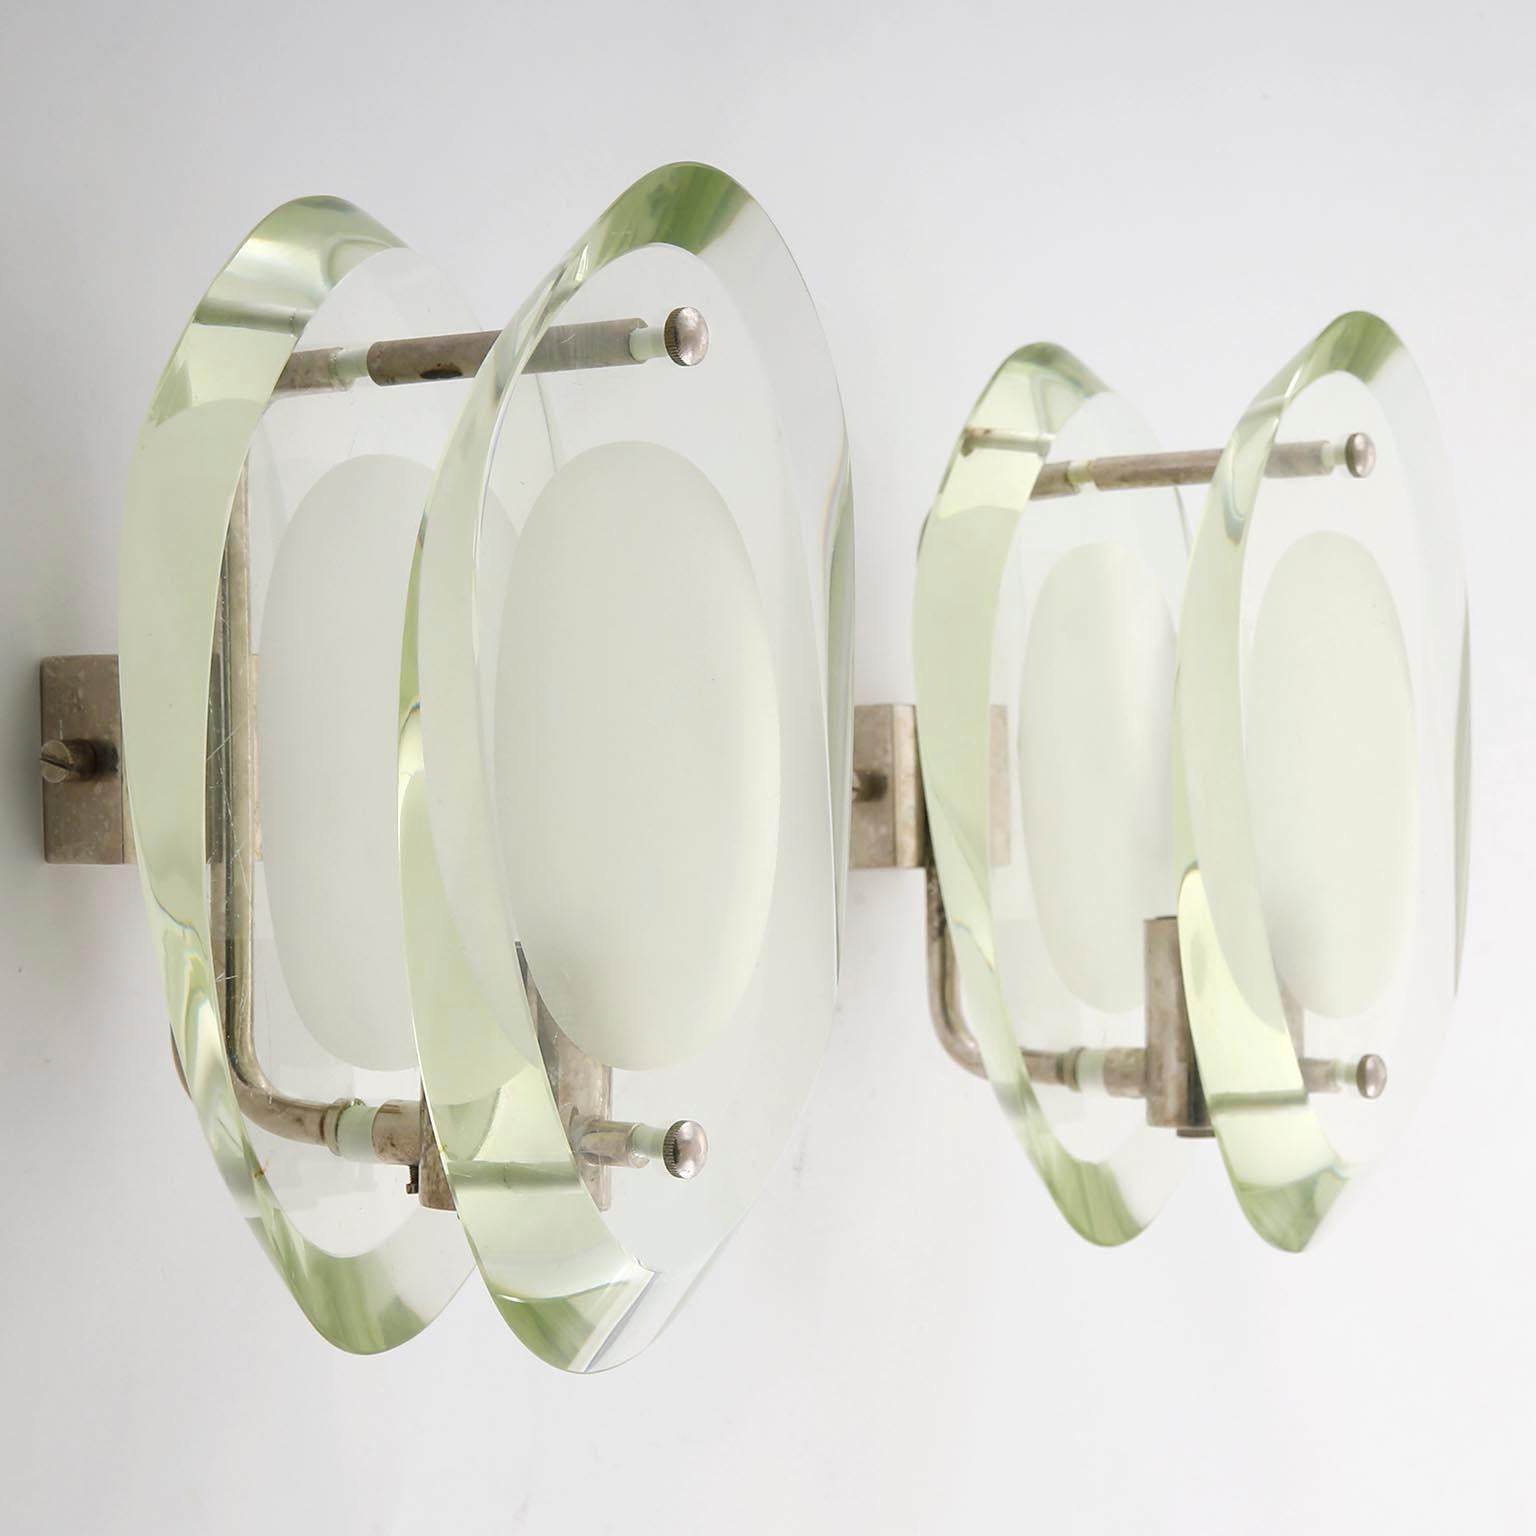 Pair of Max Ingrand Fontana Arte Sconces Wall Lamps, Glass Nickel, Italy, 1960 (Moderne der Mitte des Jahrhunderts)